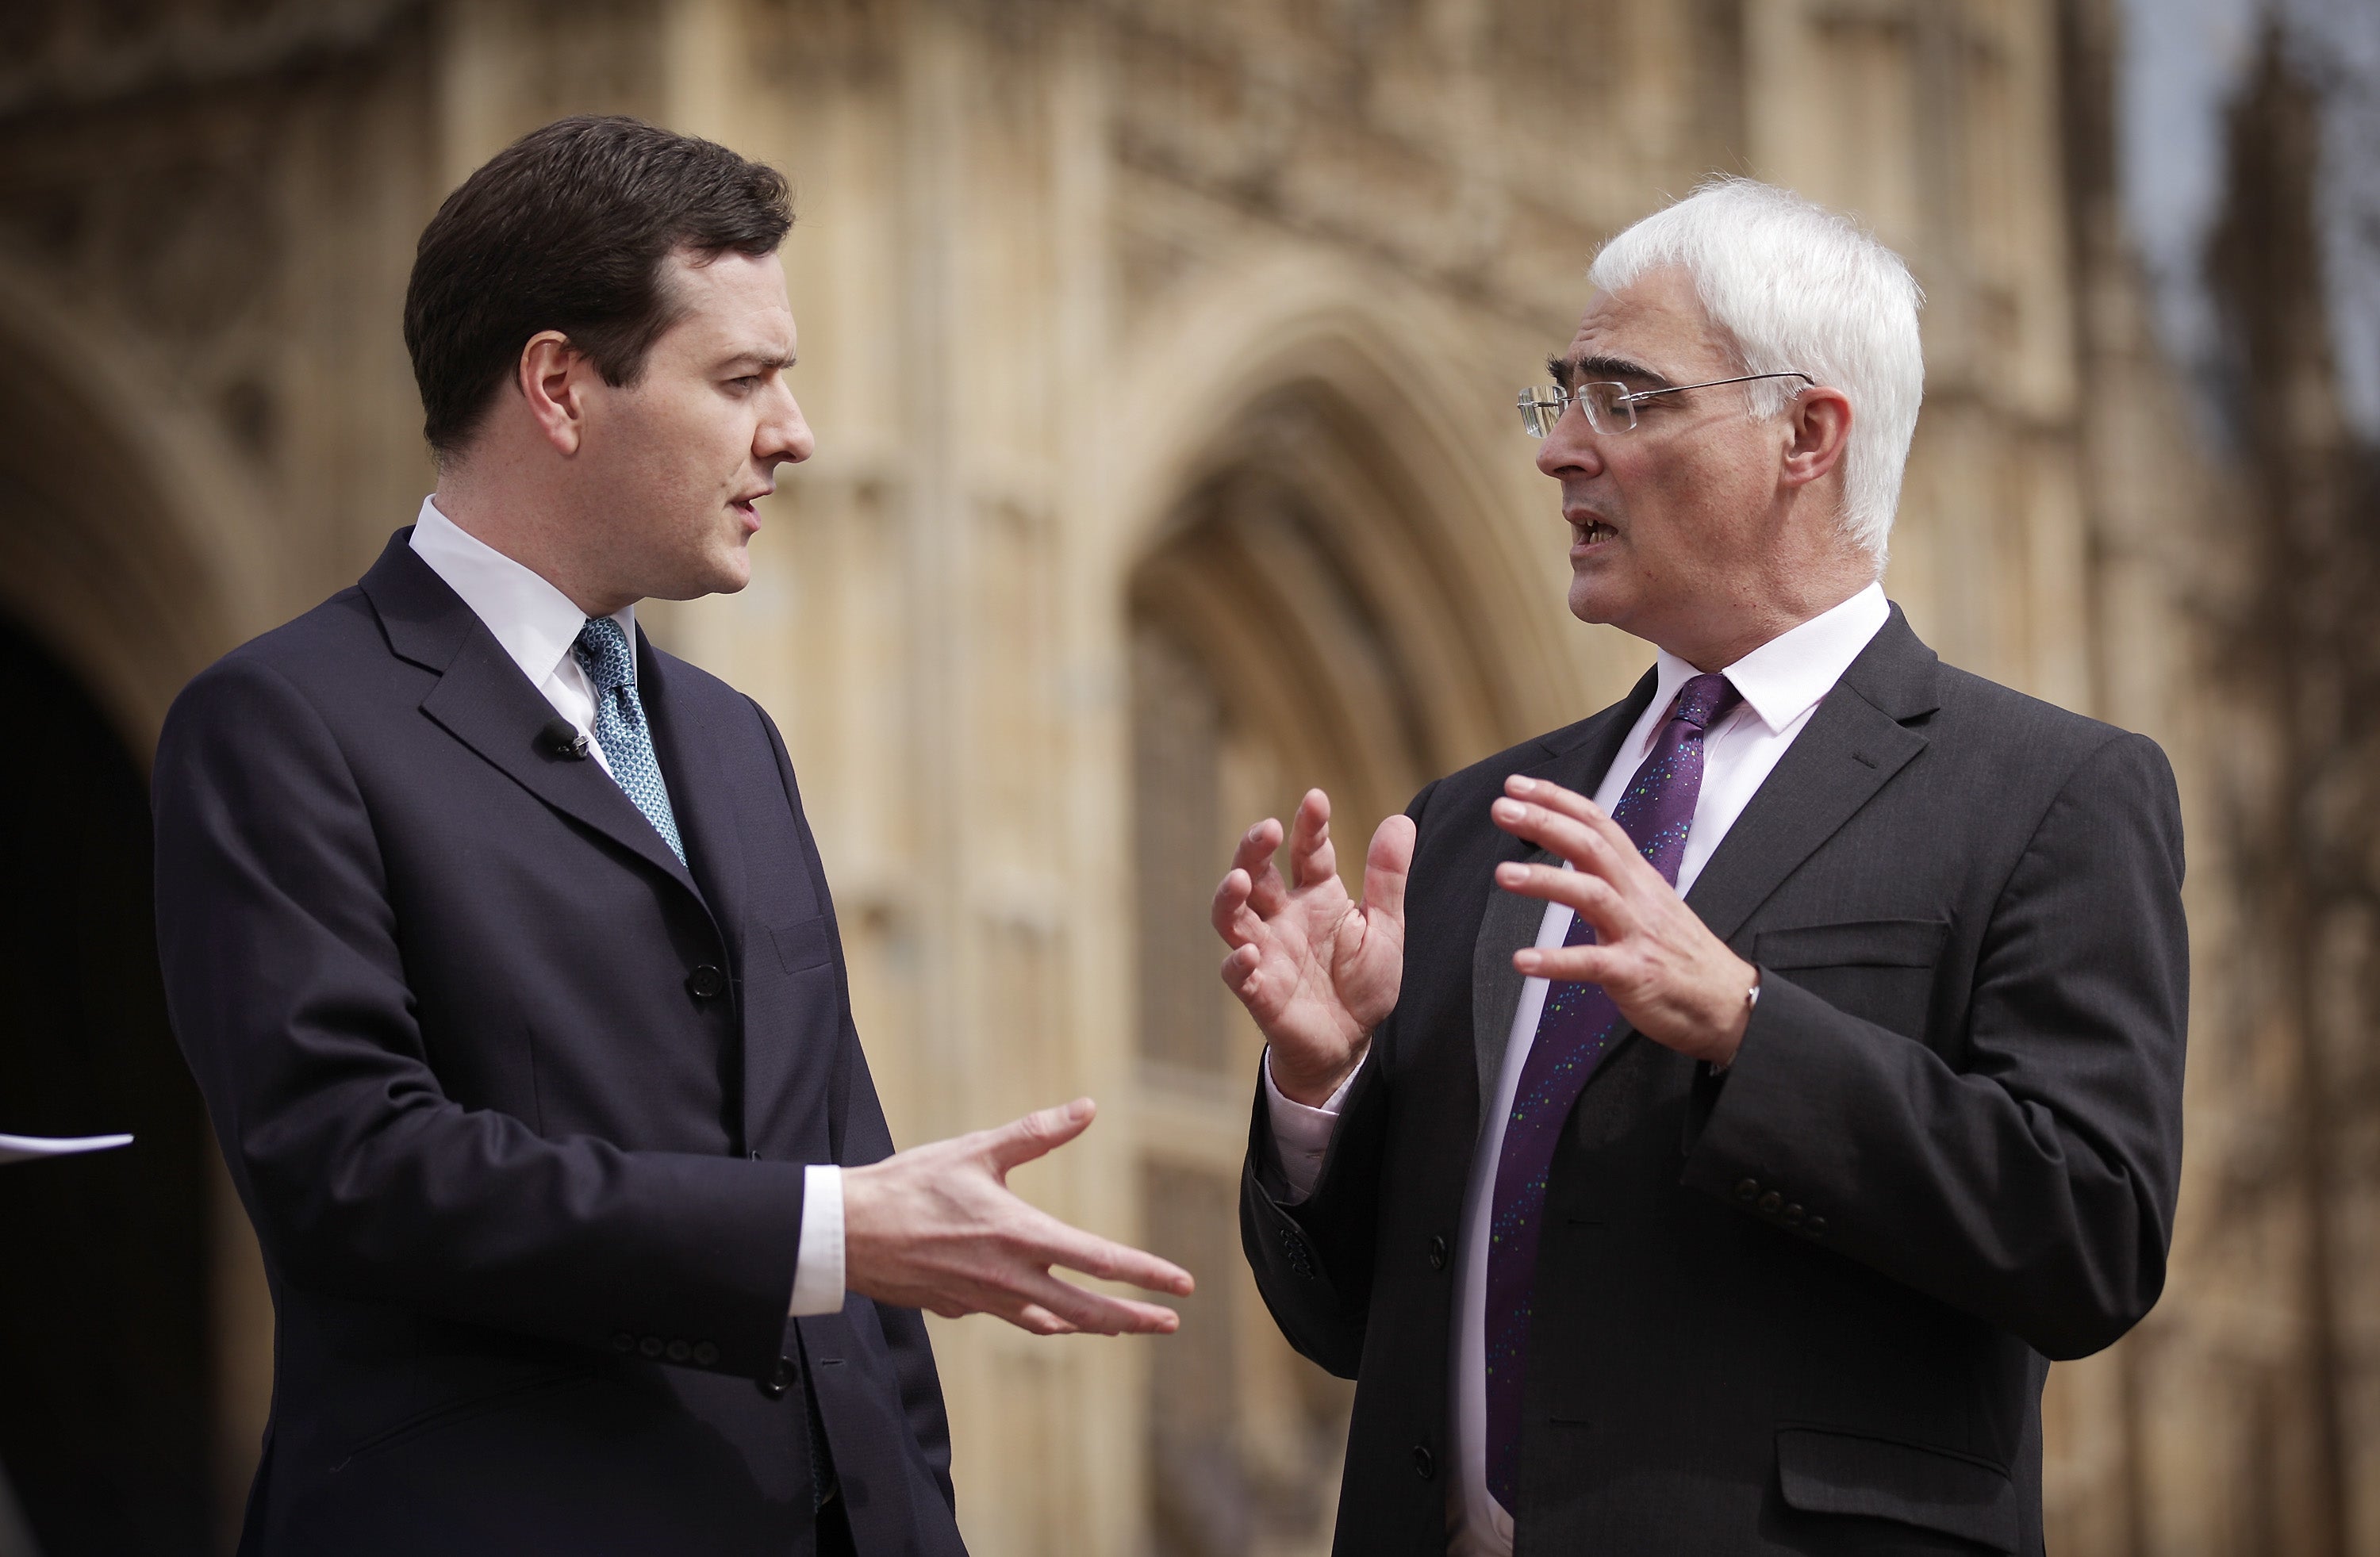 Mr Darling with the then shadow chancellor George Osborne prior to the 2010 general election